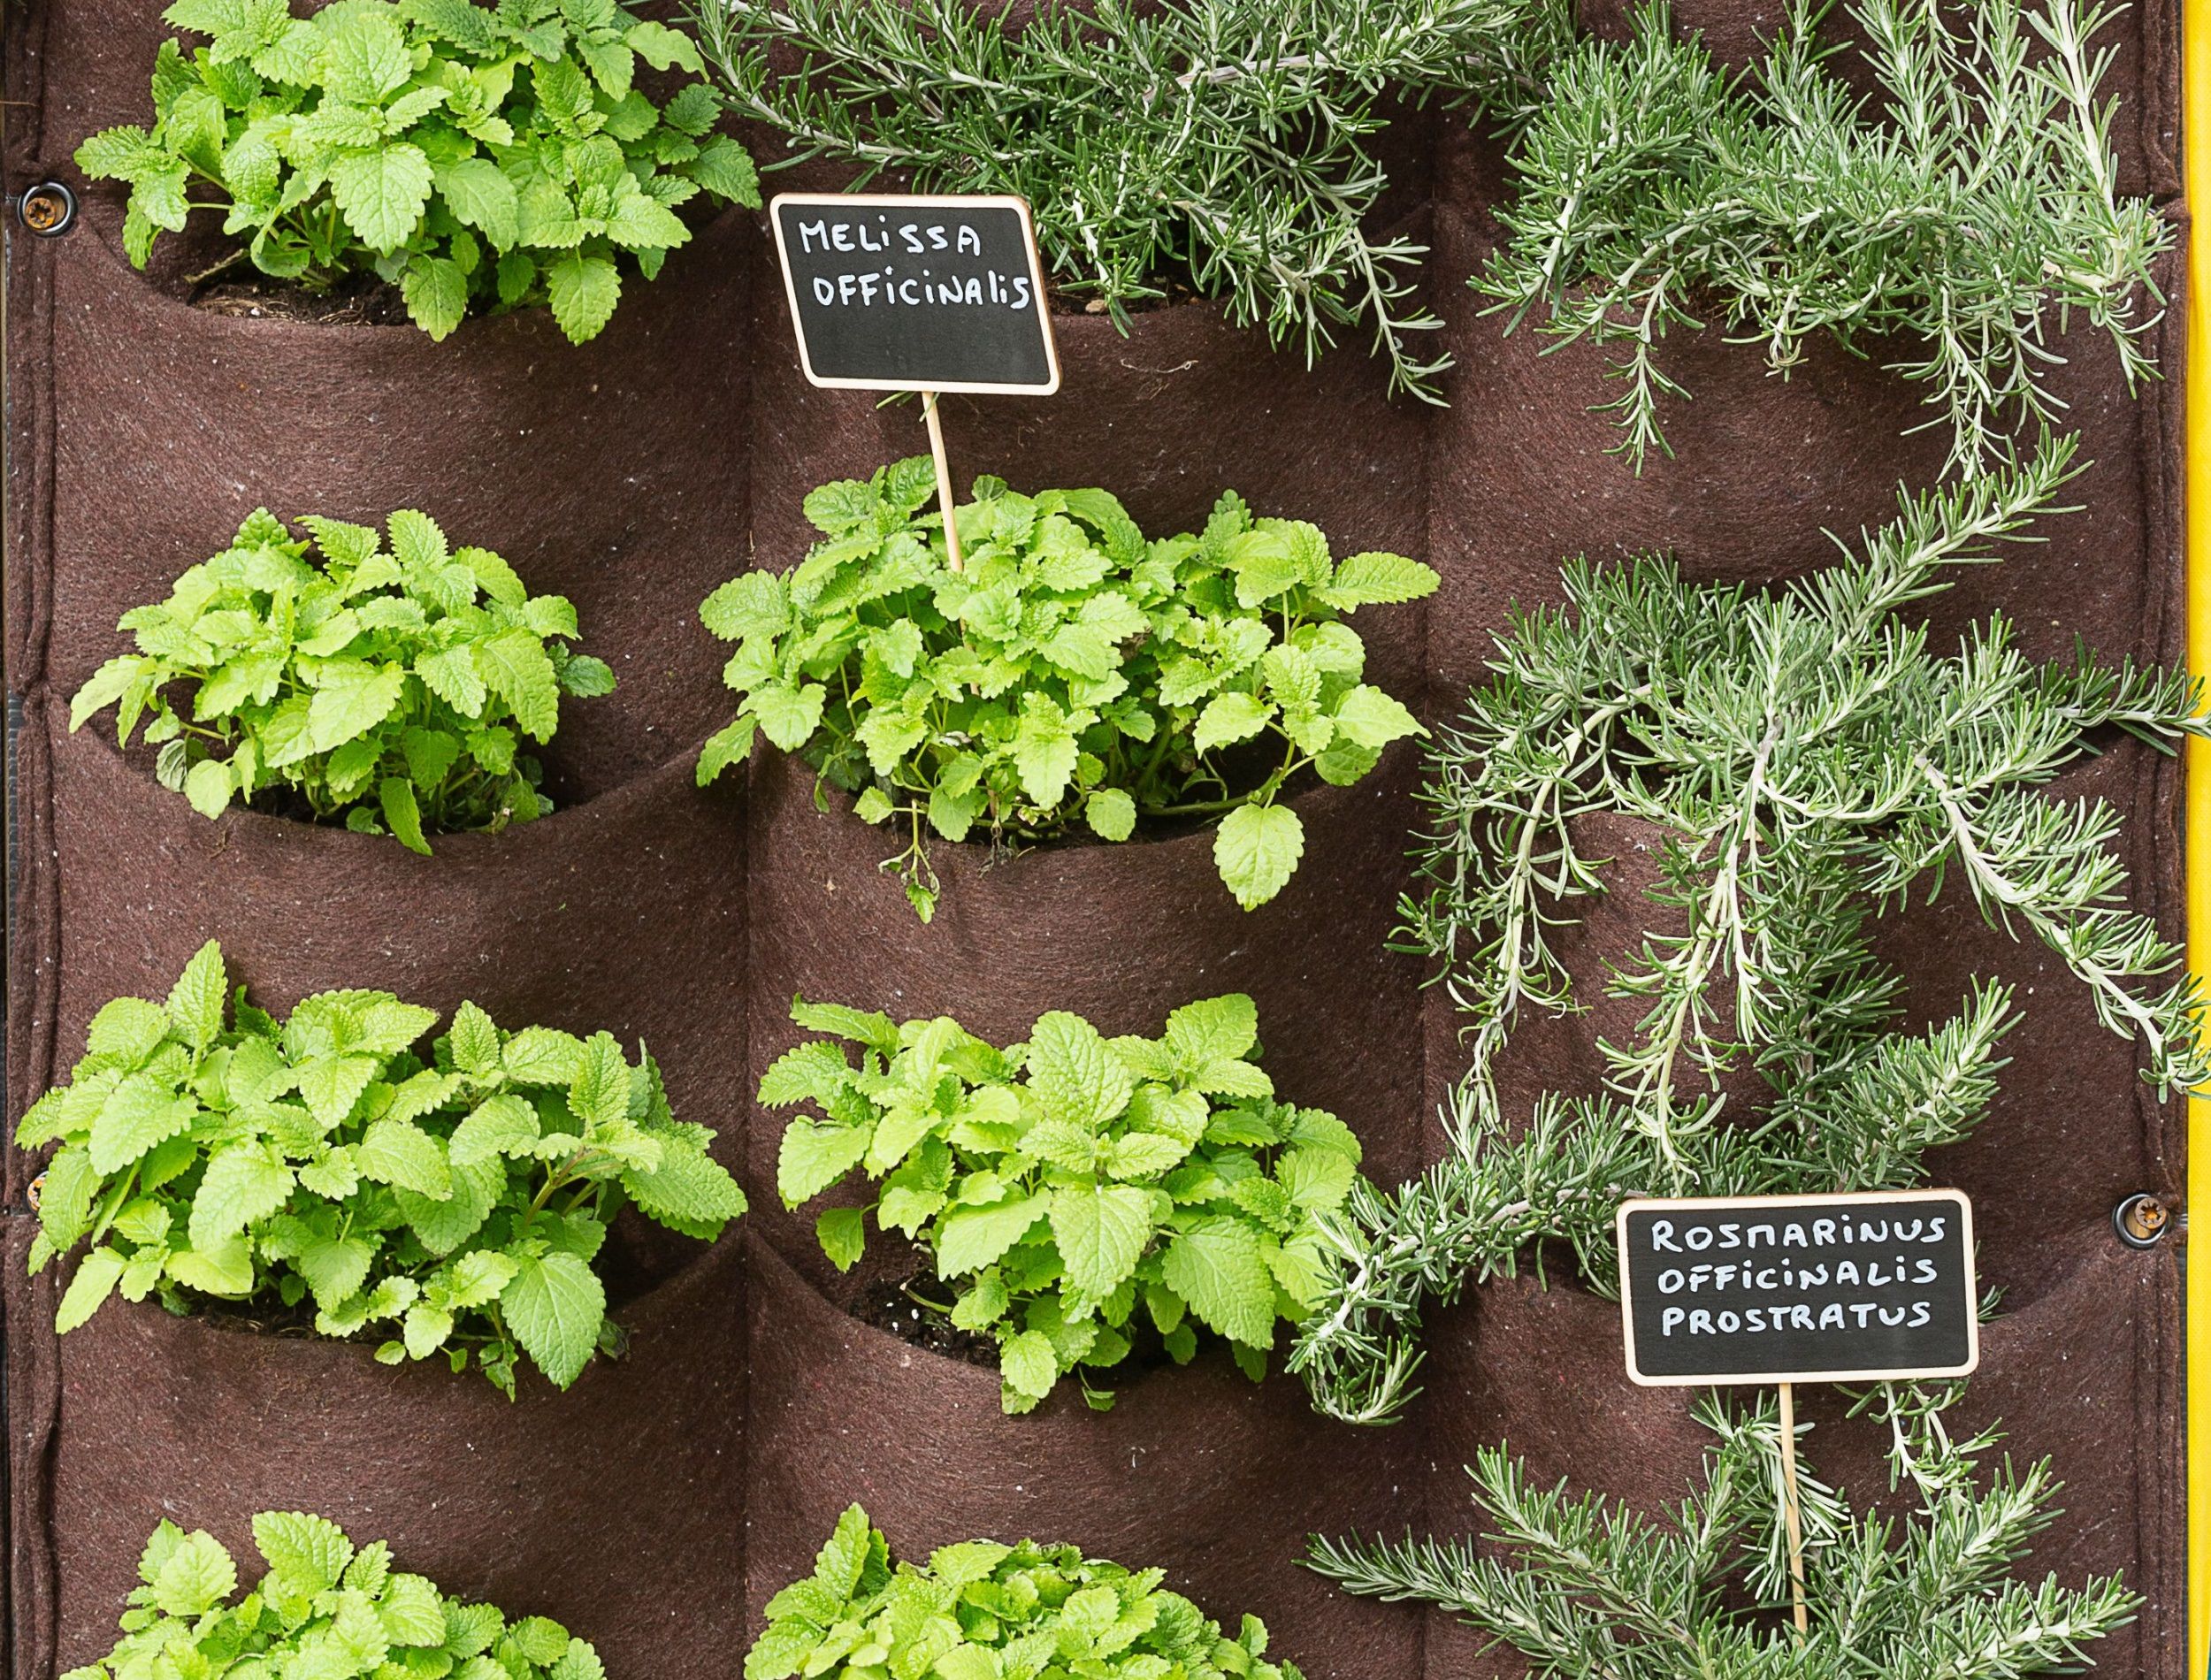 Vertical wall pocket garden with lemon balm (melissa officinalis) and rosemary (rosmarinus officinalis prostratus), with name tags